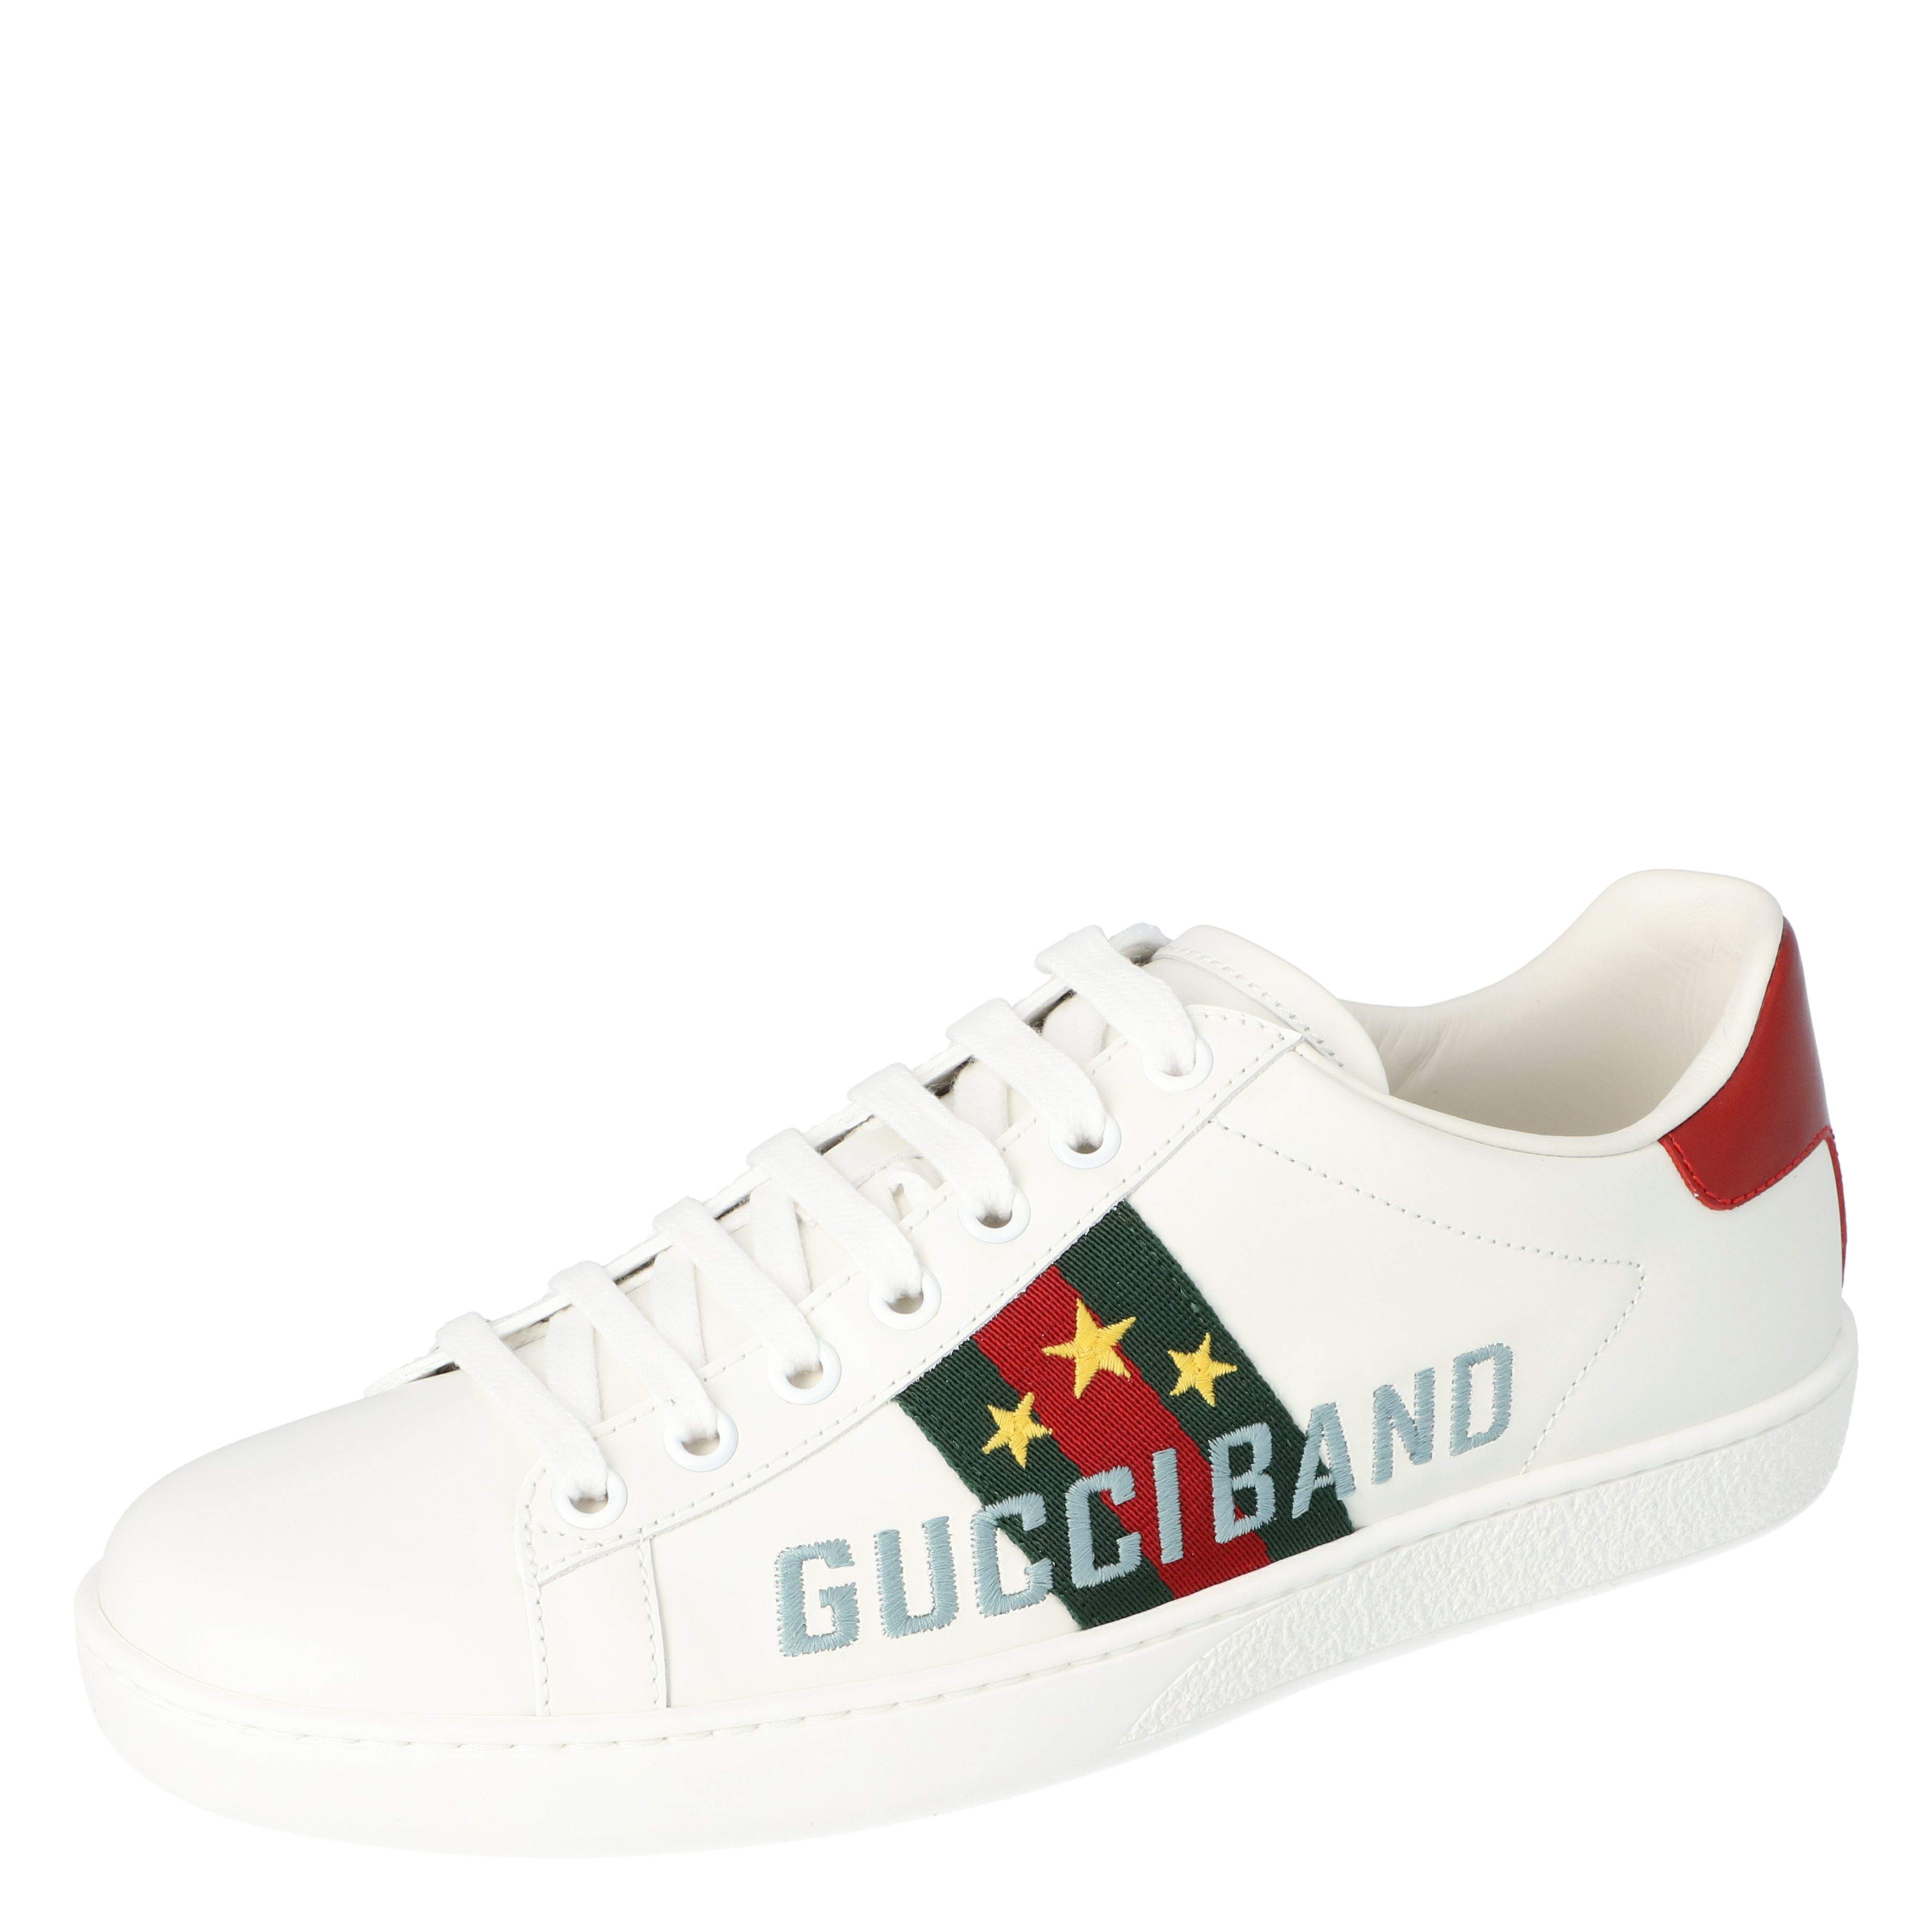 Gucci White Leather Gucci Band Embroidery Ace Low-Top Sneakers Size 36